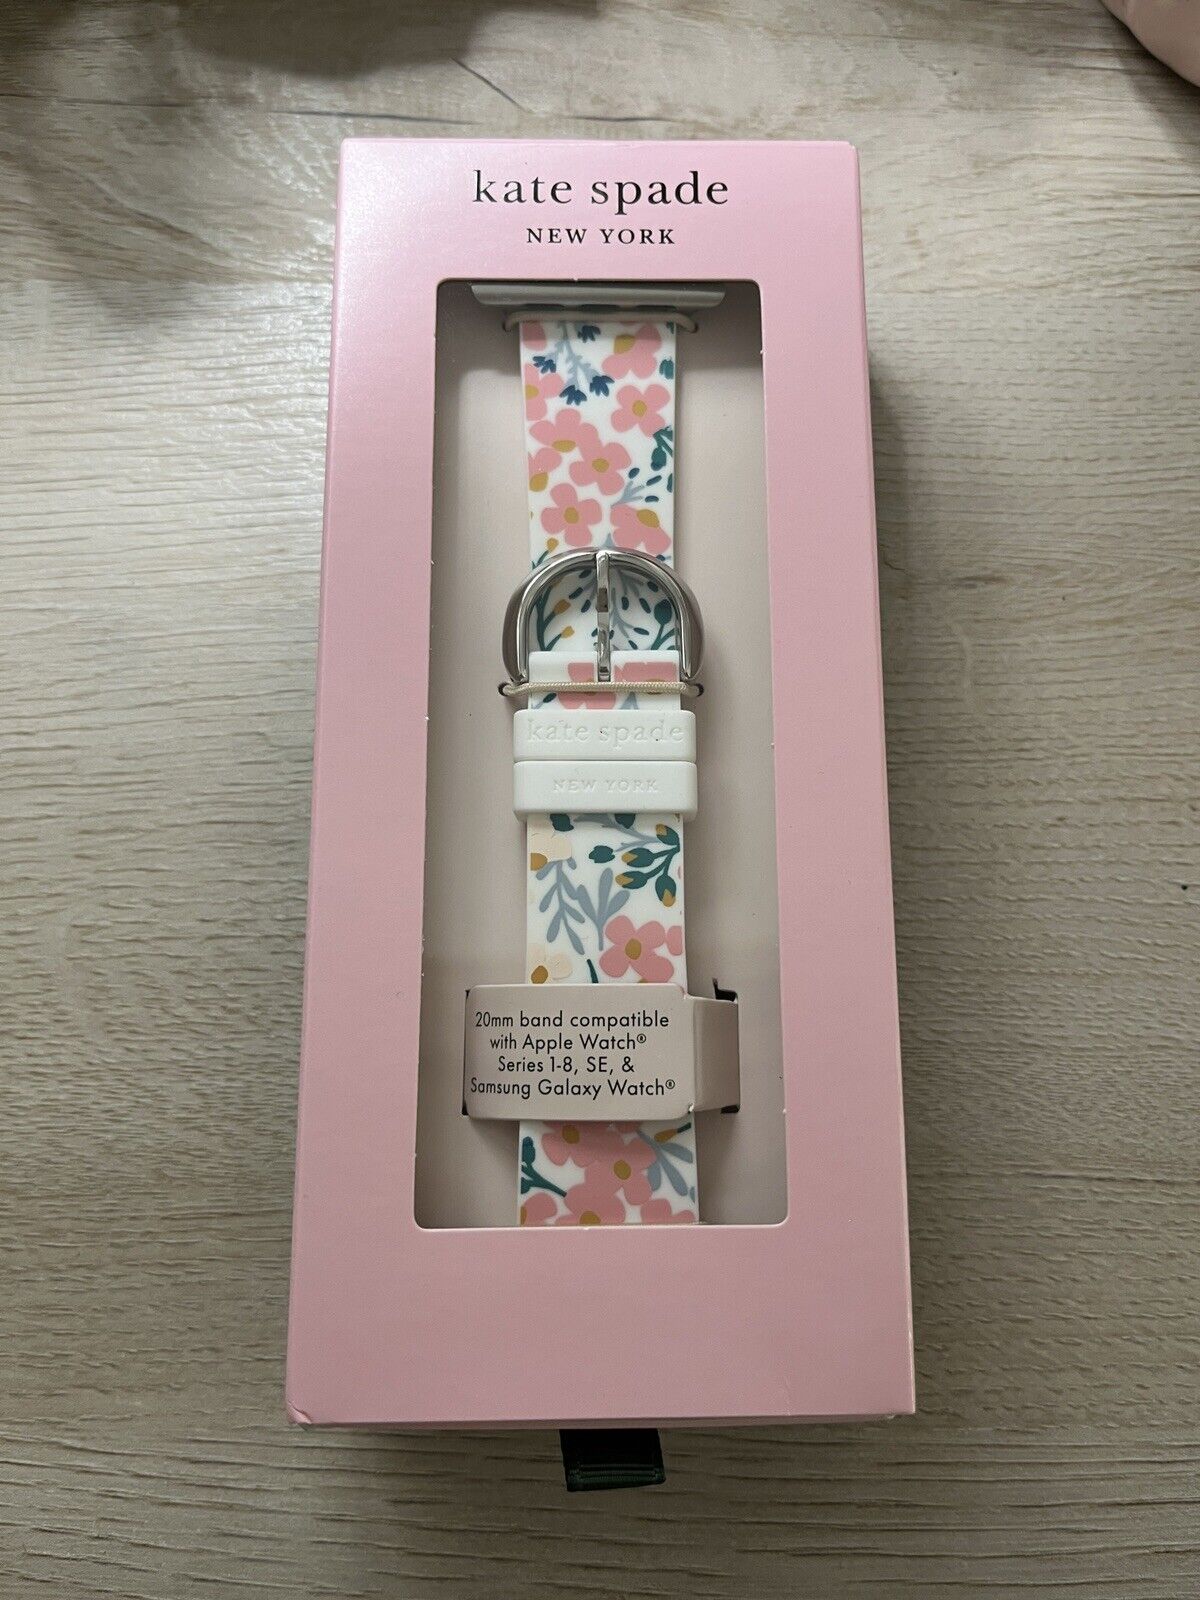 Kate Spade Apple Watch Floral Print Silicone Band - 38/40mm, White Floral  796483379855 | eBay